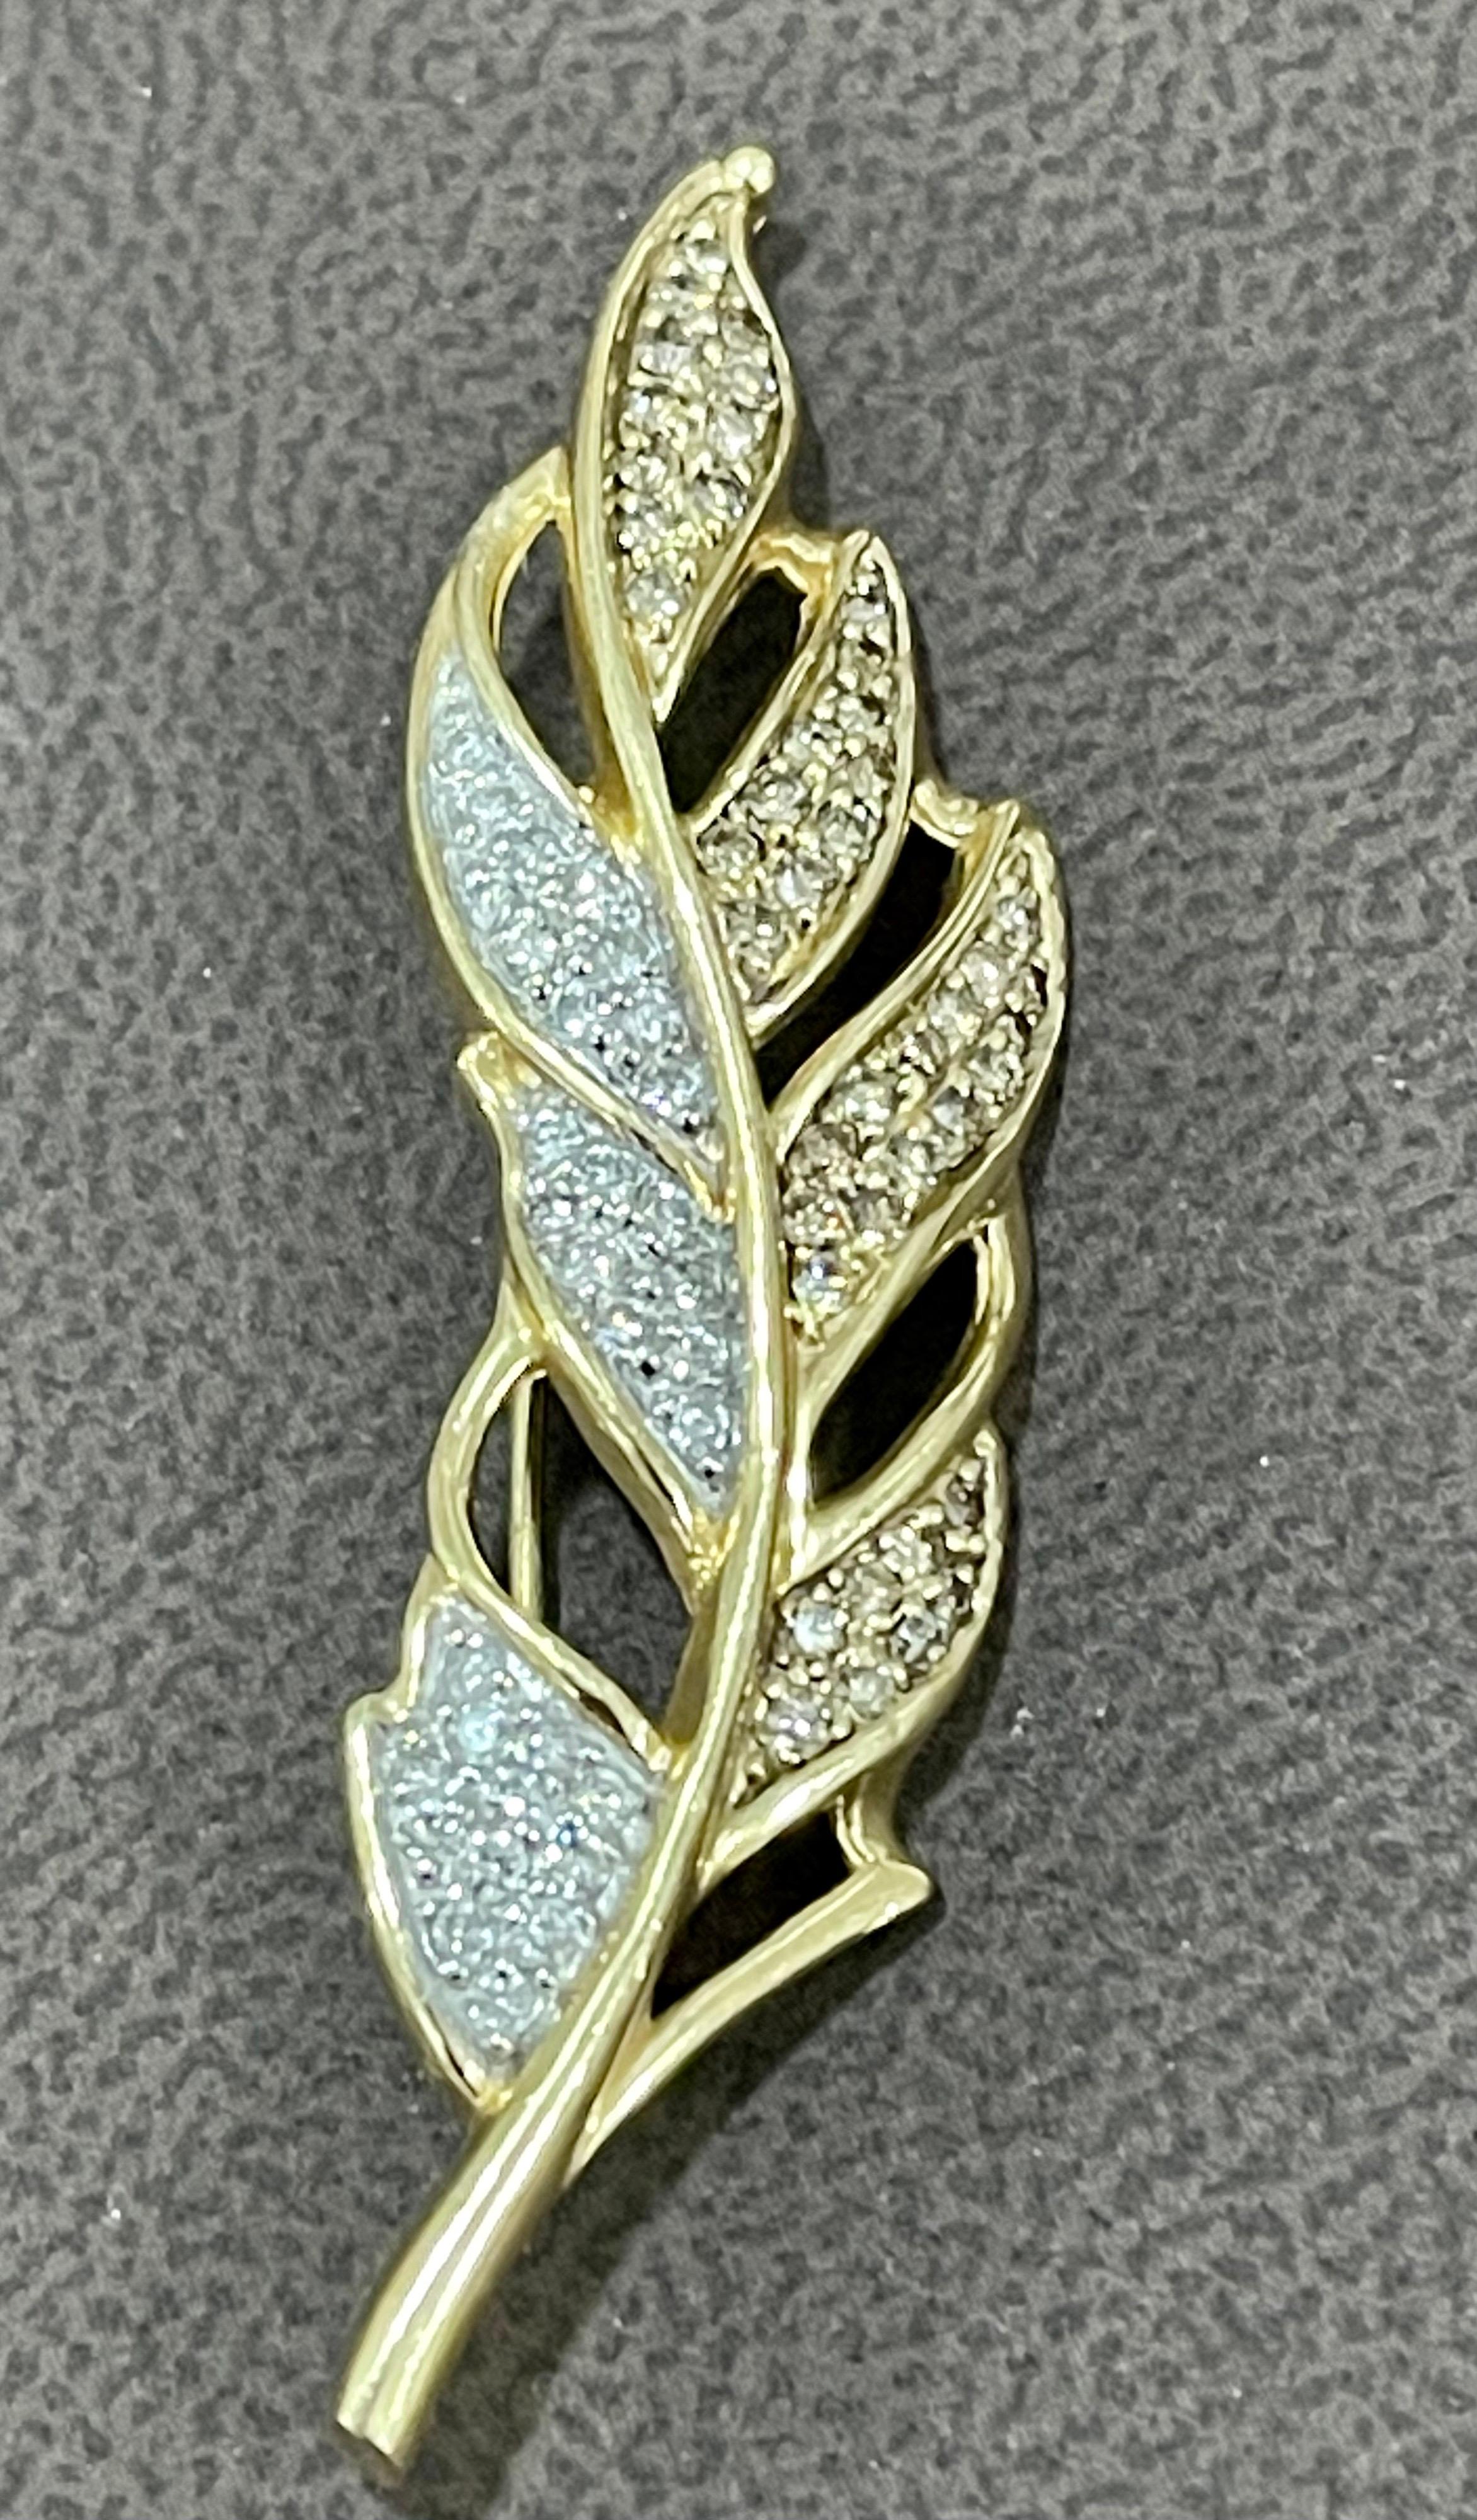 0.6 Carat Leaf Shaped Diamond 14 Karat Gold Pin or Brooch Affordable, Estate
Set with two colors of round diamonds , one side with champagne color diamond and other side with white brilliant cut round diamonds. gently curving leaf shape fitted to